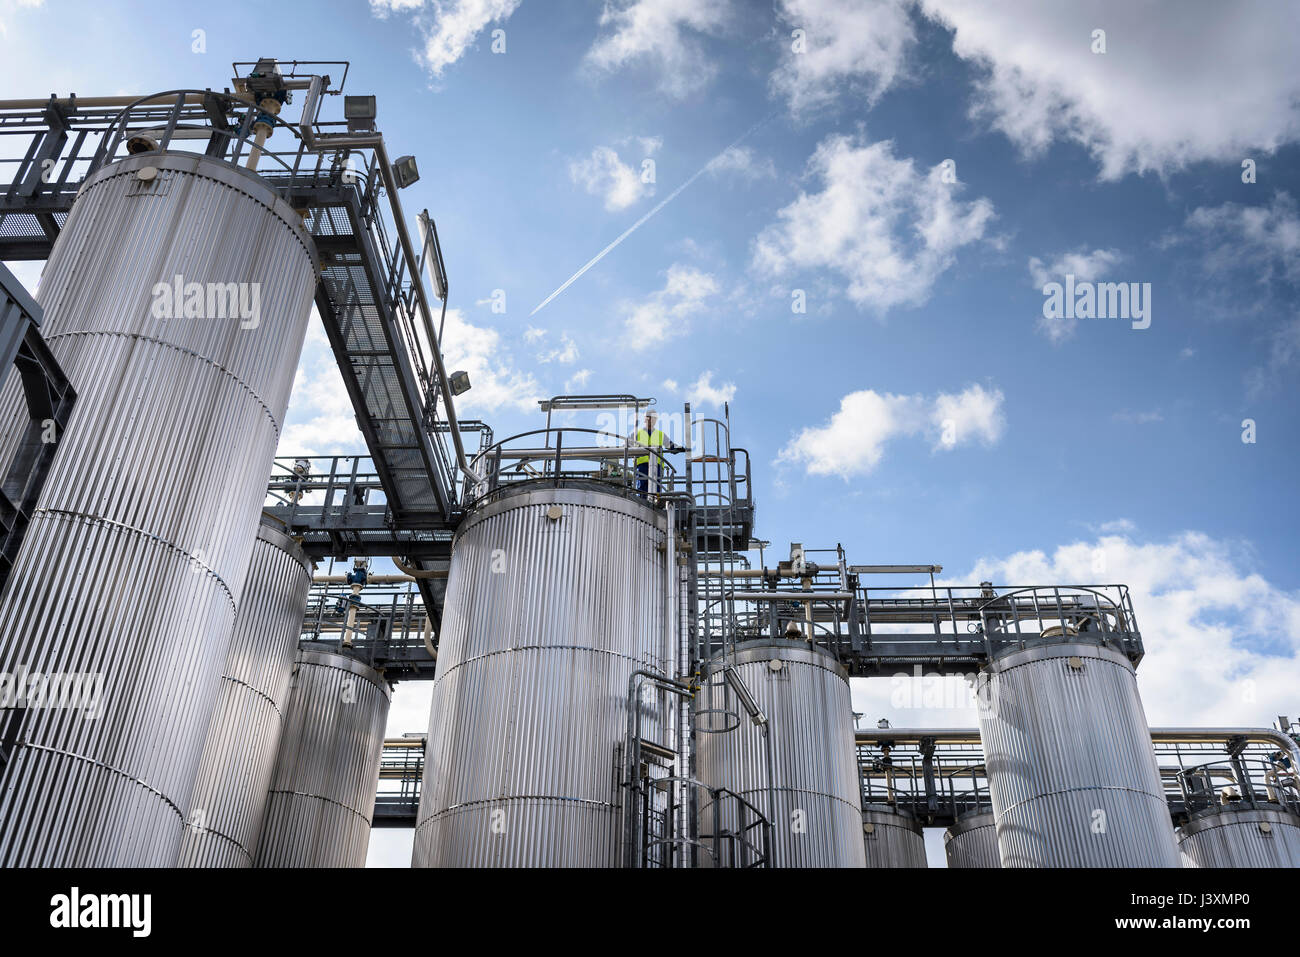 Worker on top of process plant in oil blending factory Stock Photo